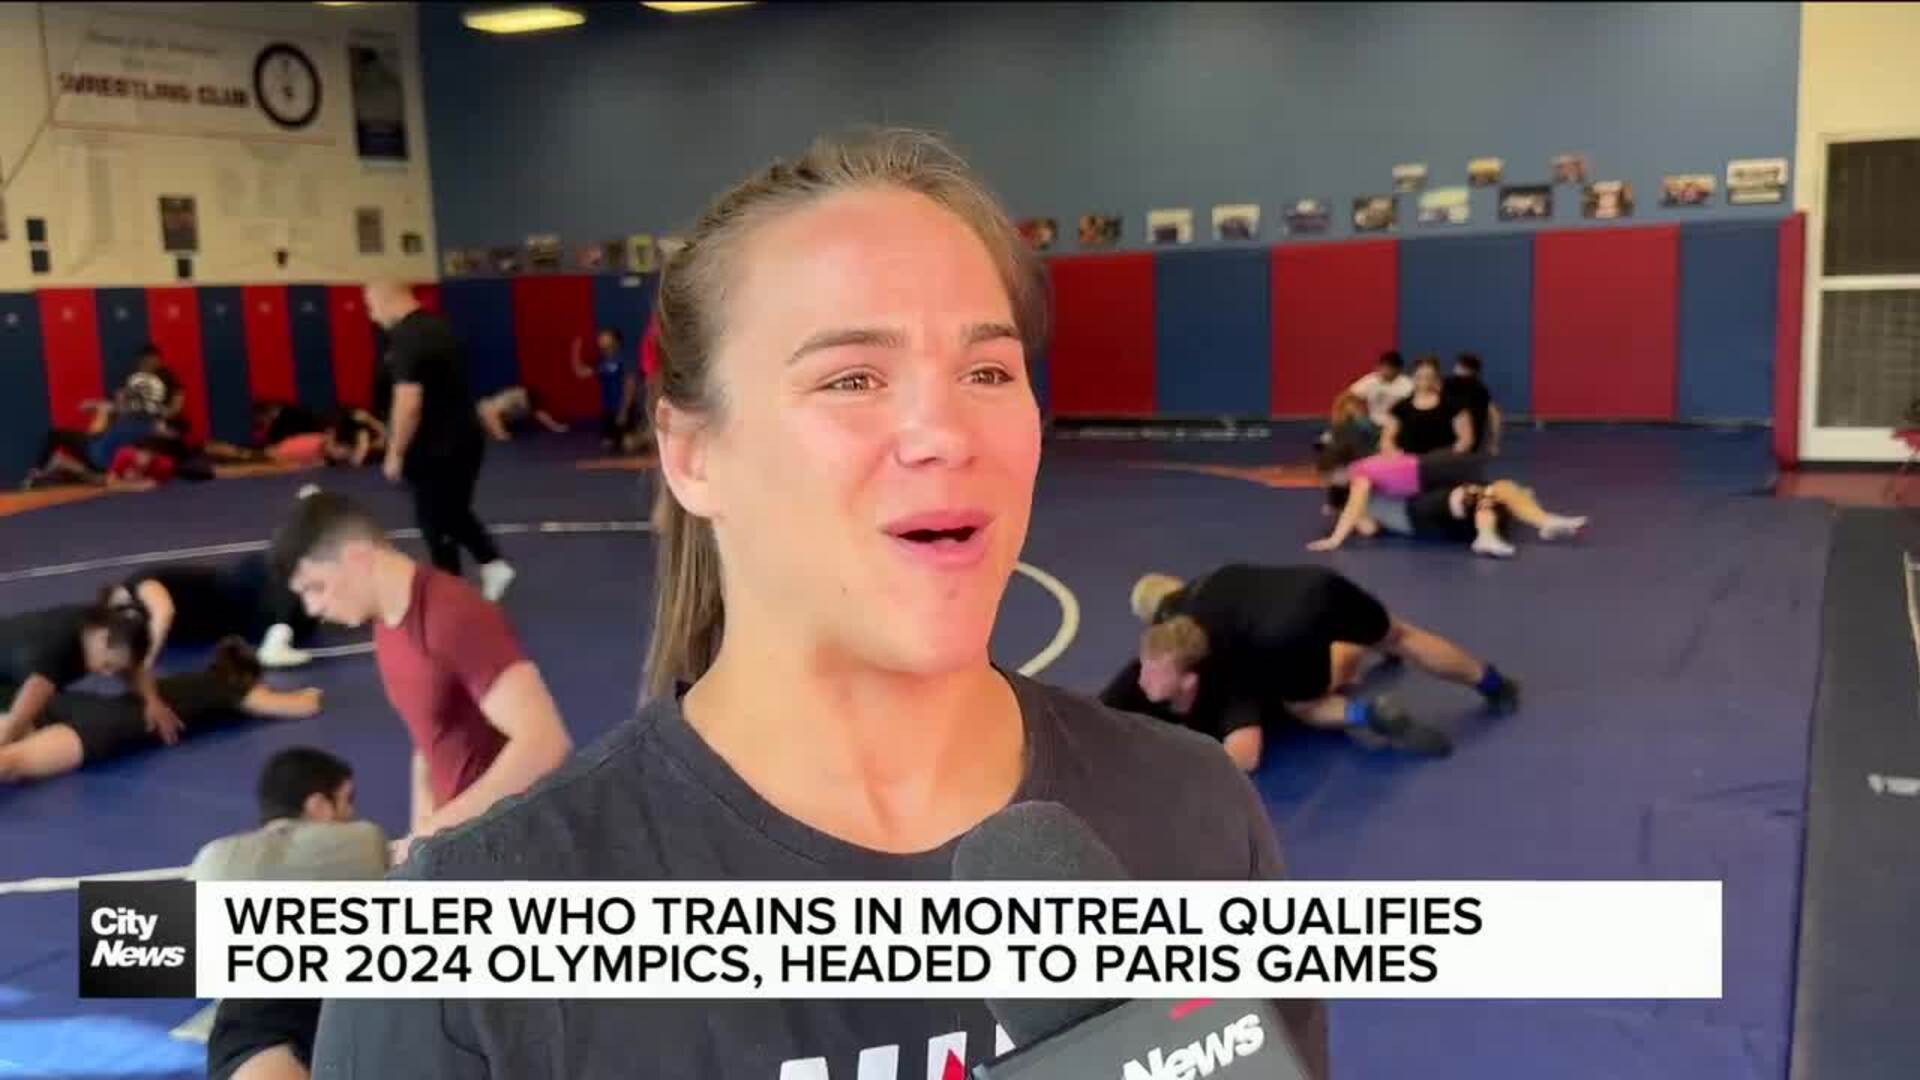 Wrestler who trains in Montreal qualifies for 2024 Olympics